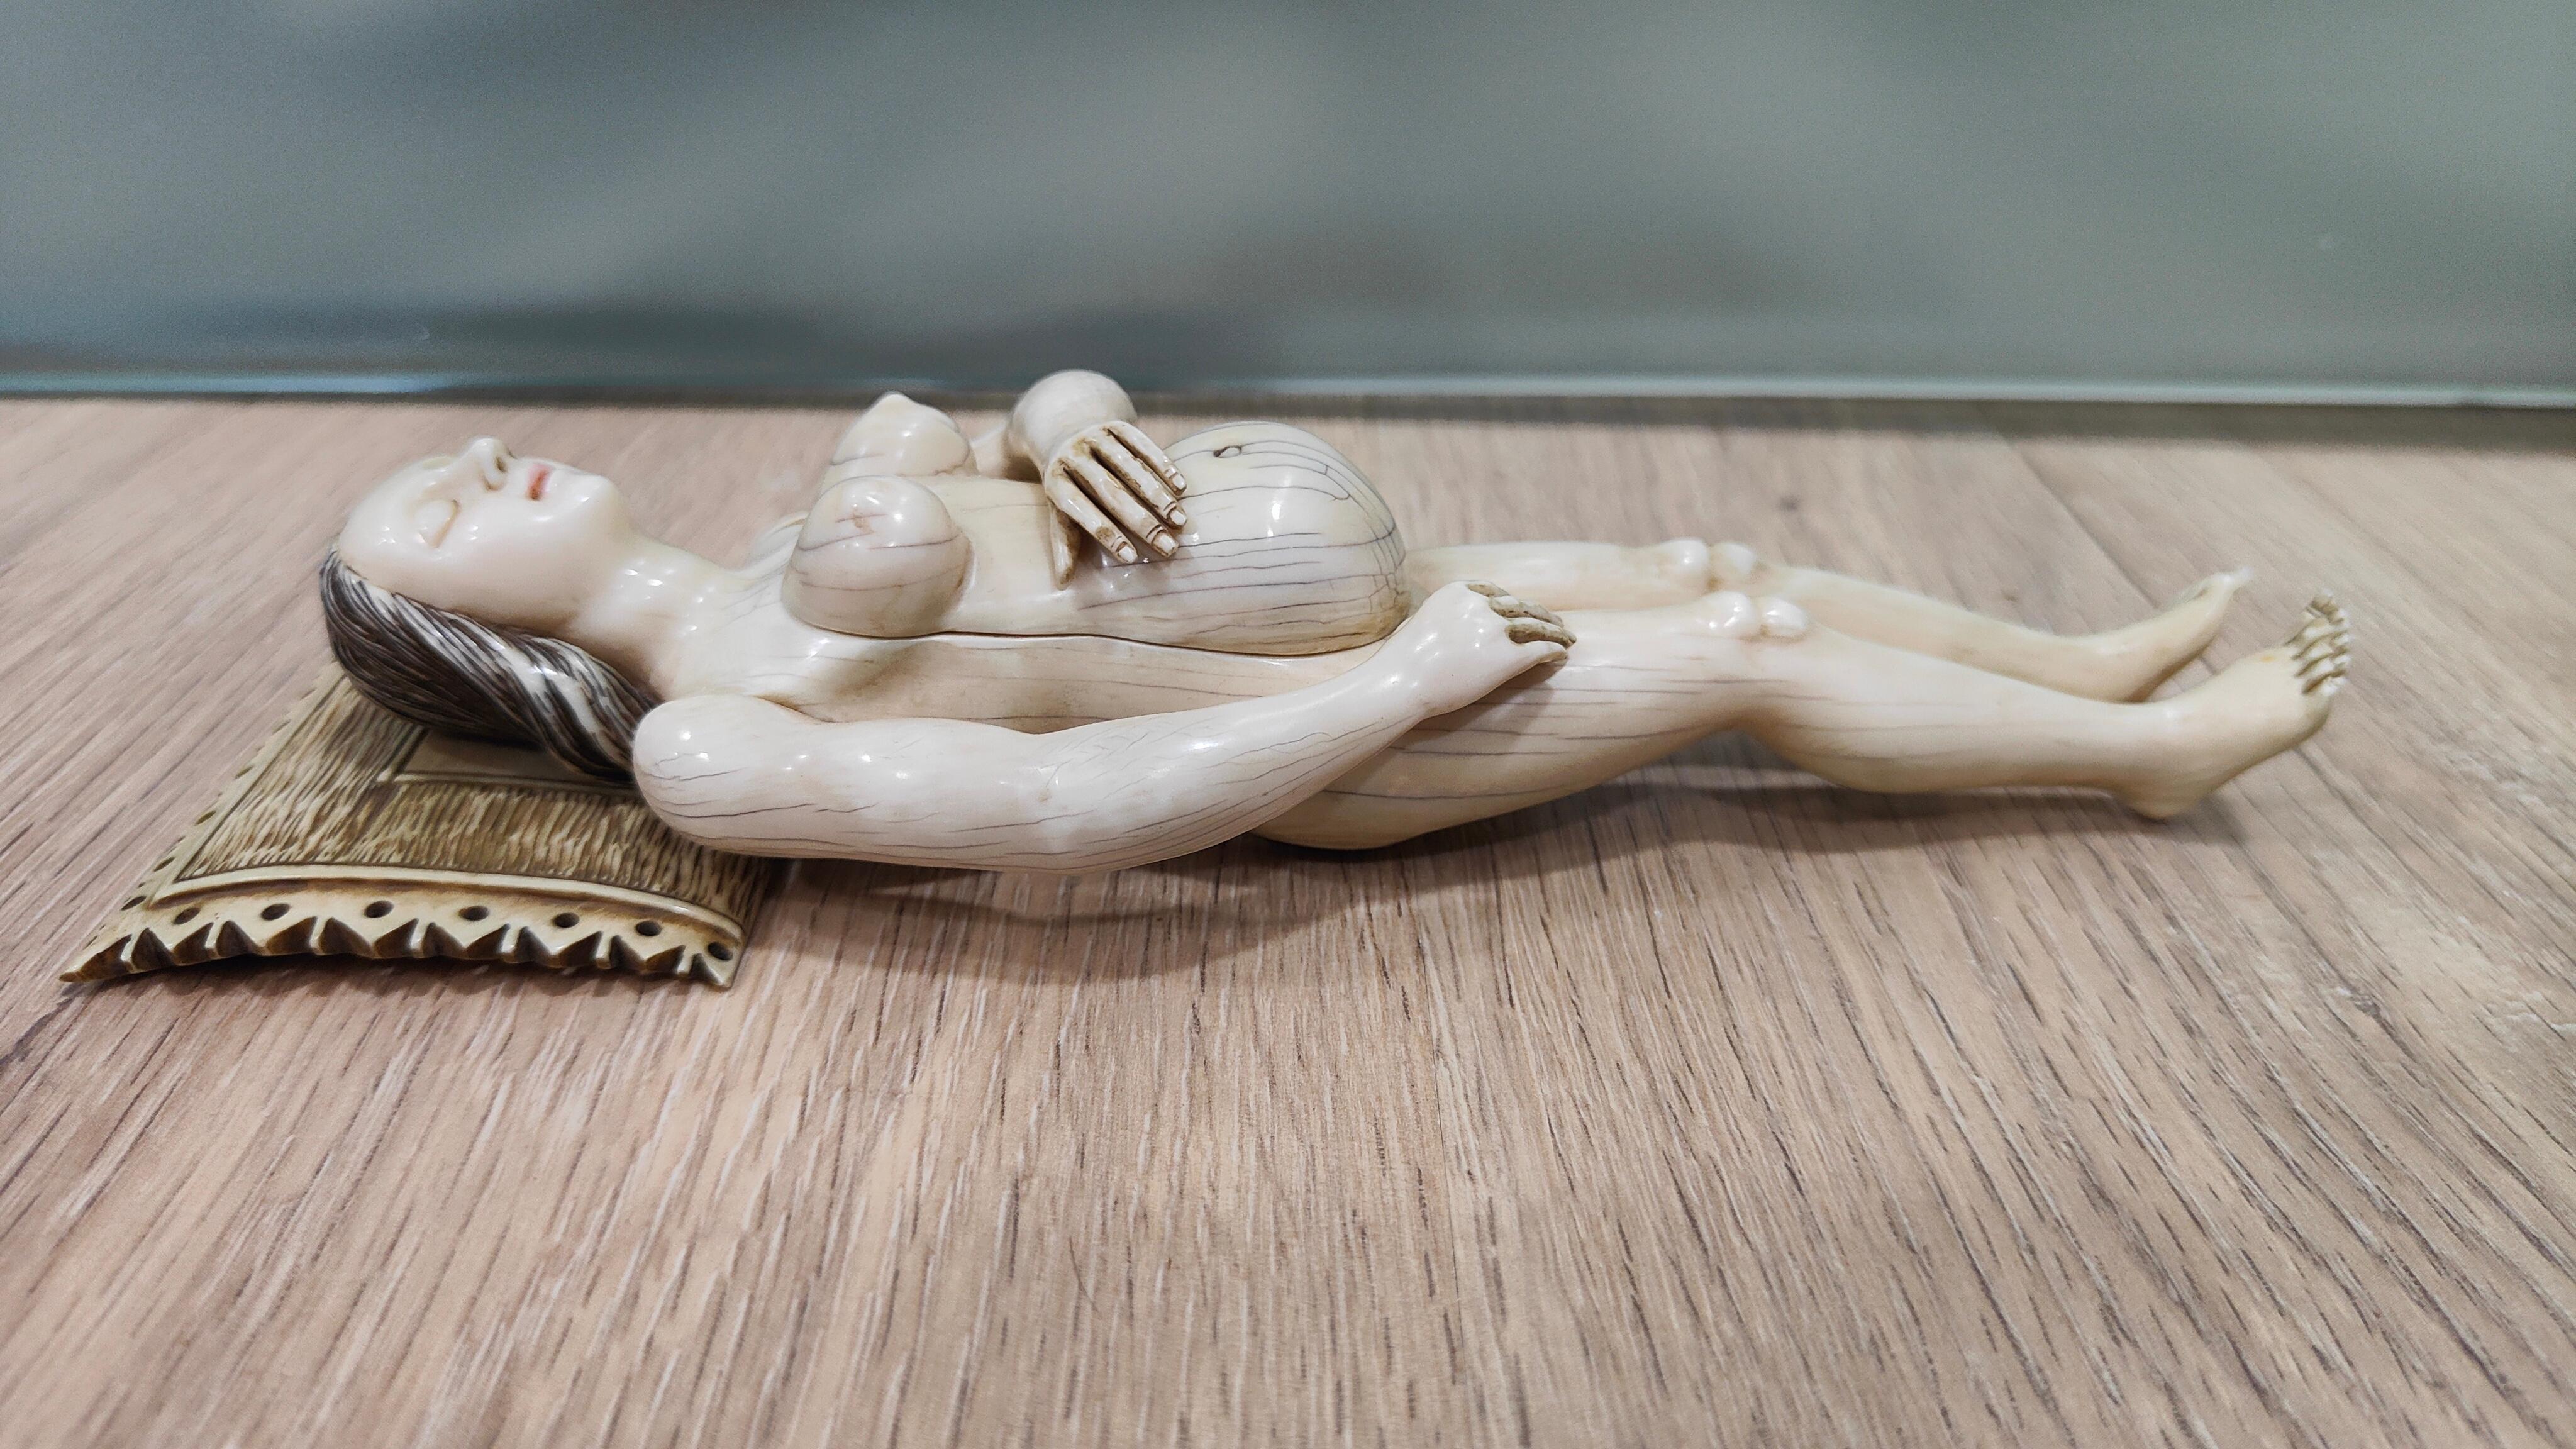 A GERMAN  ANATOMICAL MODEL OF a PREGNANT WOMAN STEPHEN ZICK For Sale 5